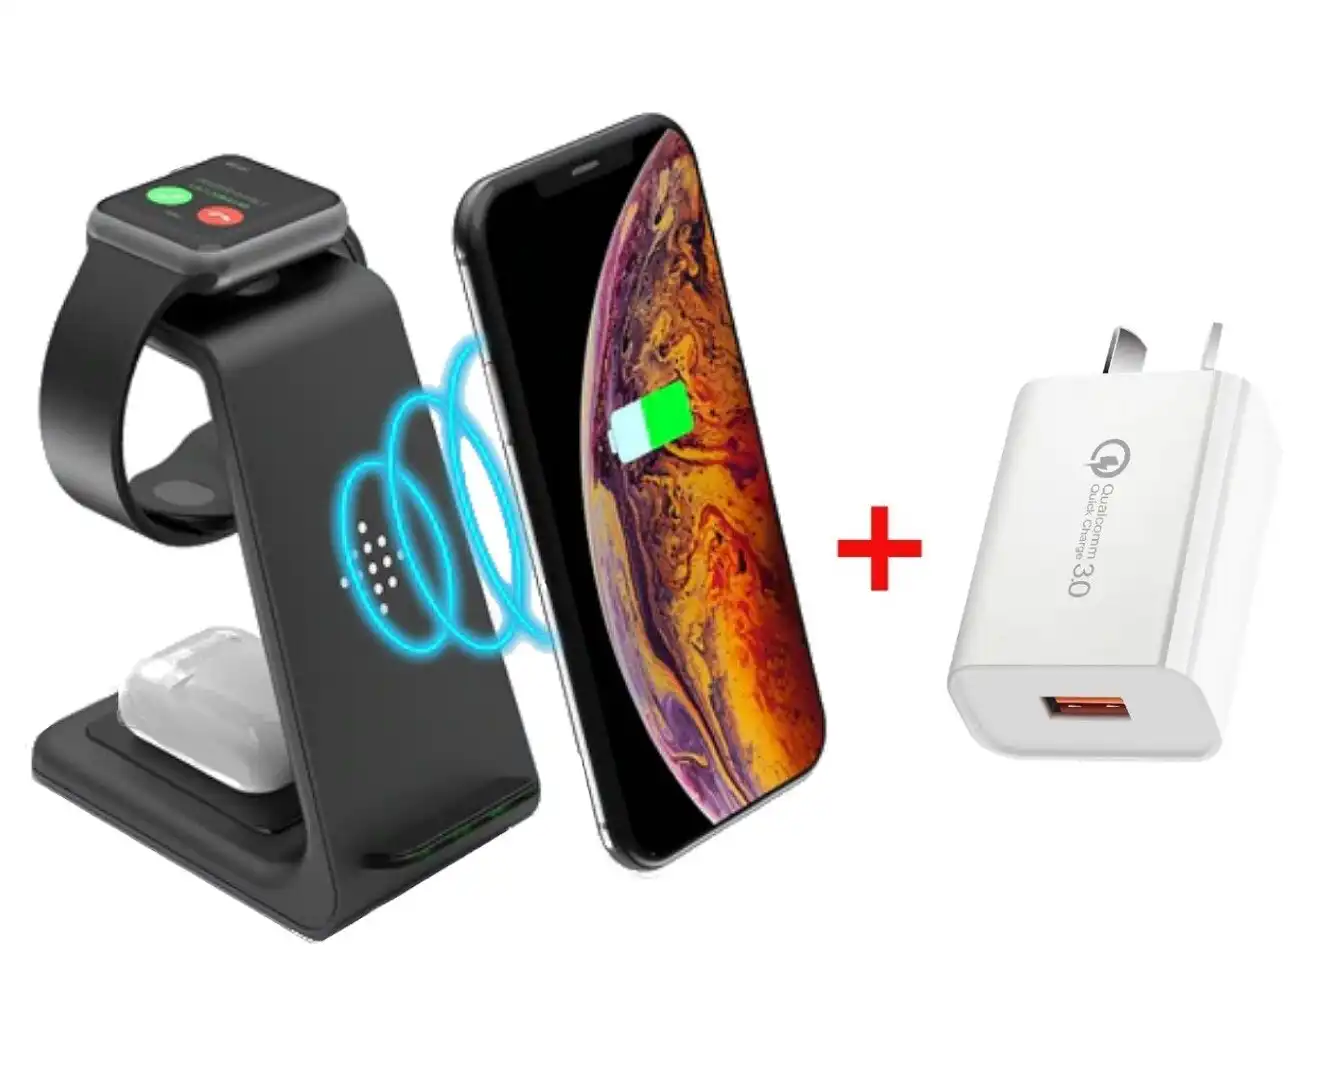 Orotec NexGen Ultra 10W Apple 3-in-1 Triple Wireless Charger (Apple Watch/AirPods/Smartphone) Black + 18W Qualcomm Charger Kit